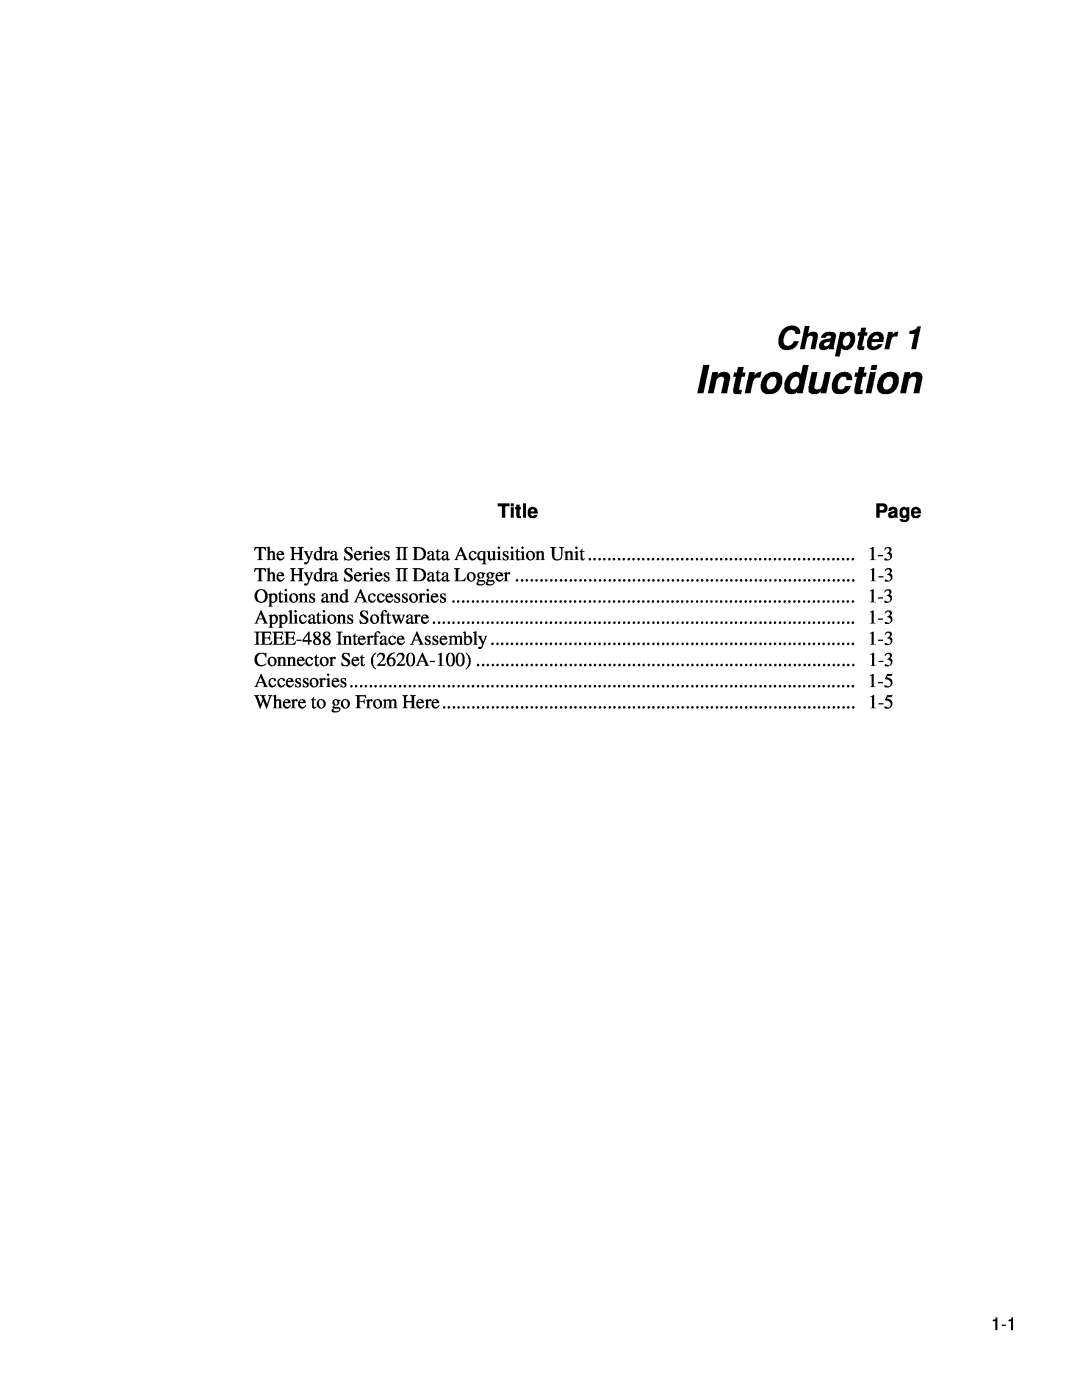 Fluke 2620A, 2625A user manual Introduction, Chapter, Title, Page 